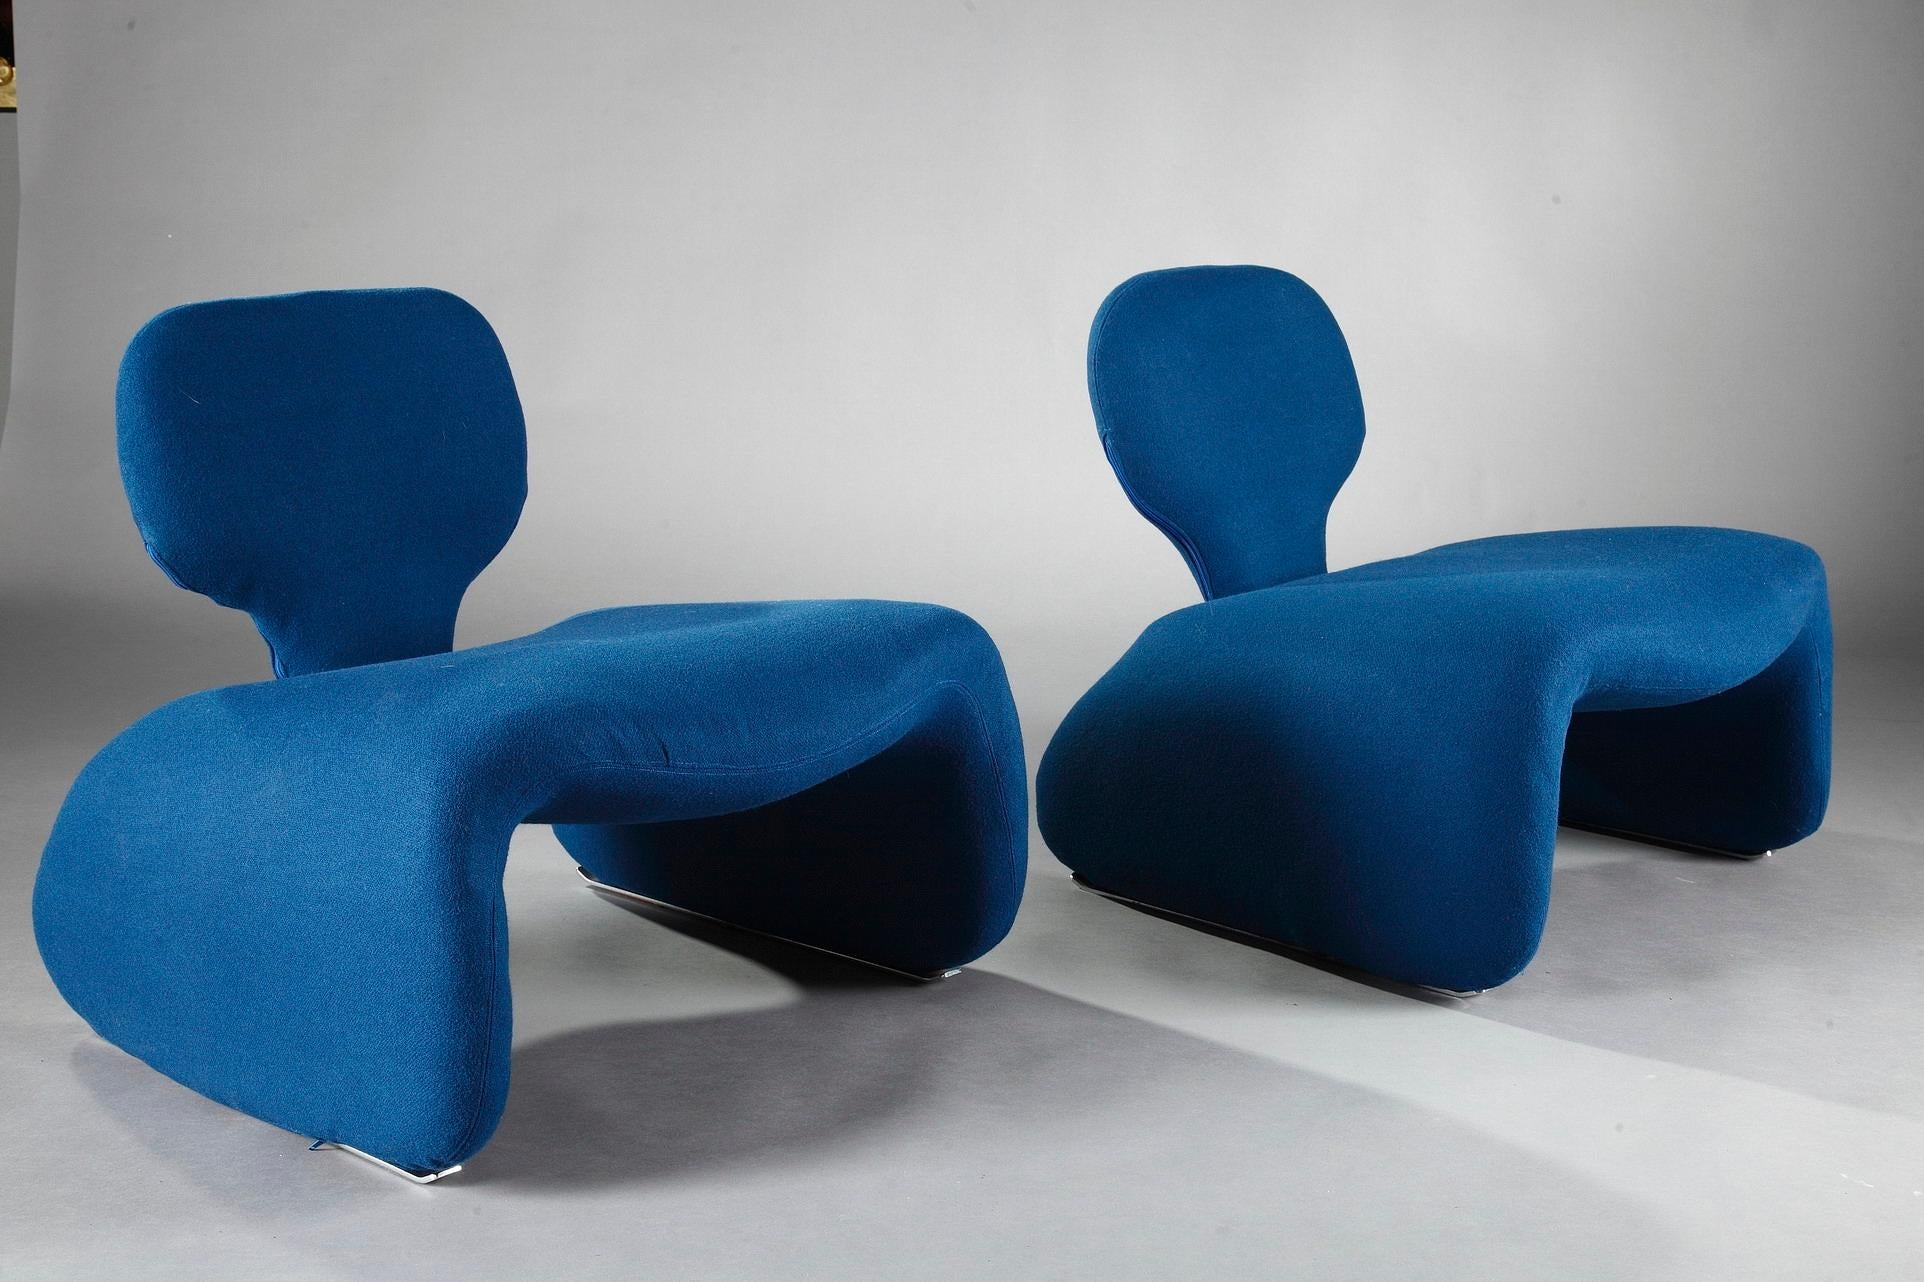 Pair of vintage Djinn chairs designed by Olivier Mourgue in the 1960s for Airborne. Metal structure lined with foam and covered with blue fabric from Kvadrat. Steel skates. This chair is an icon of the design made famous by Stanley Kubrick in 2001,